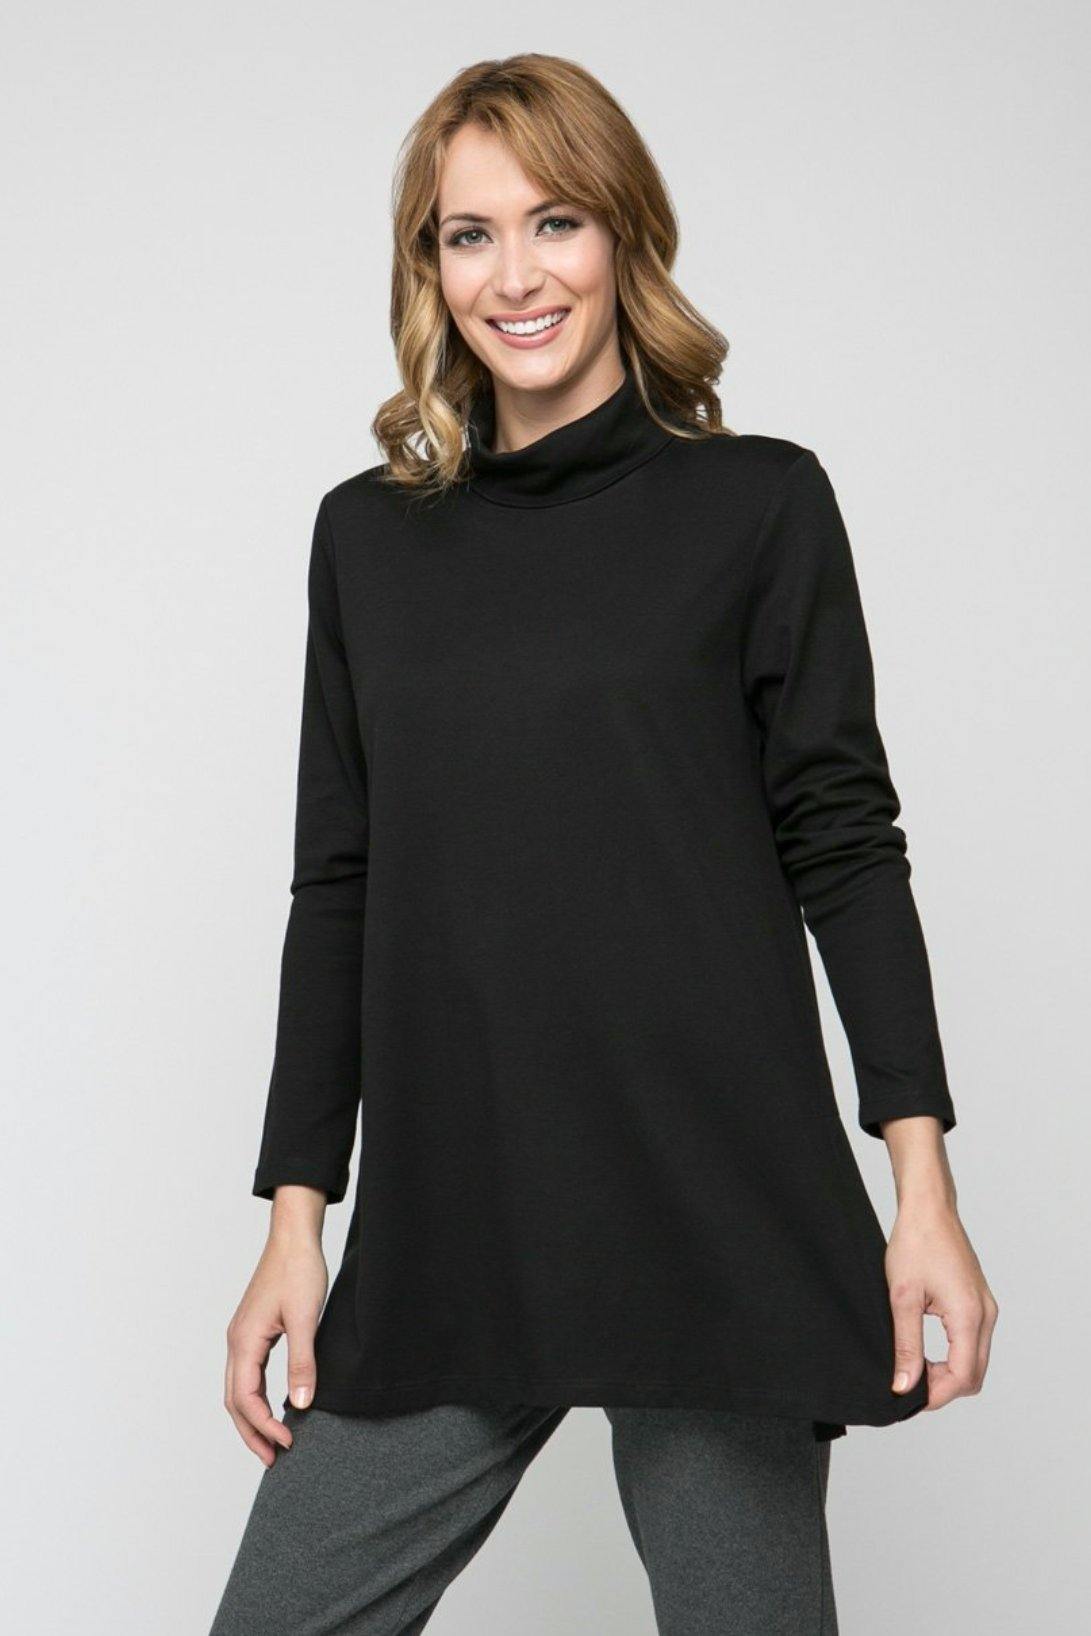 Long Sleeve Turtle Neck with Side Slits New Orleans Knitwear